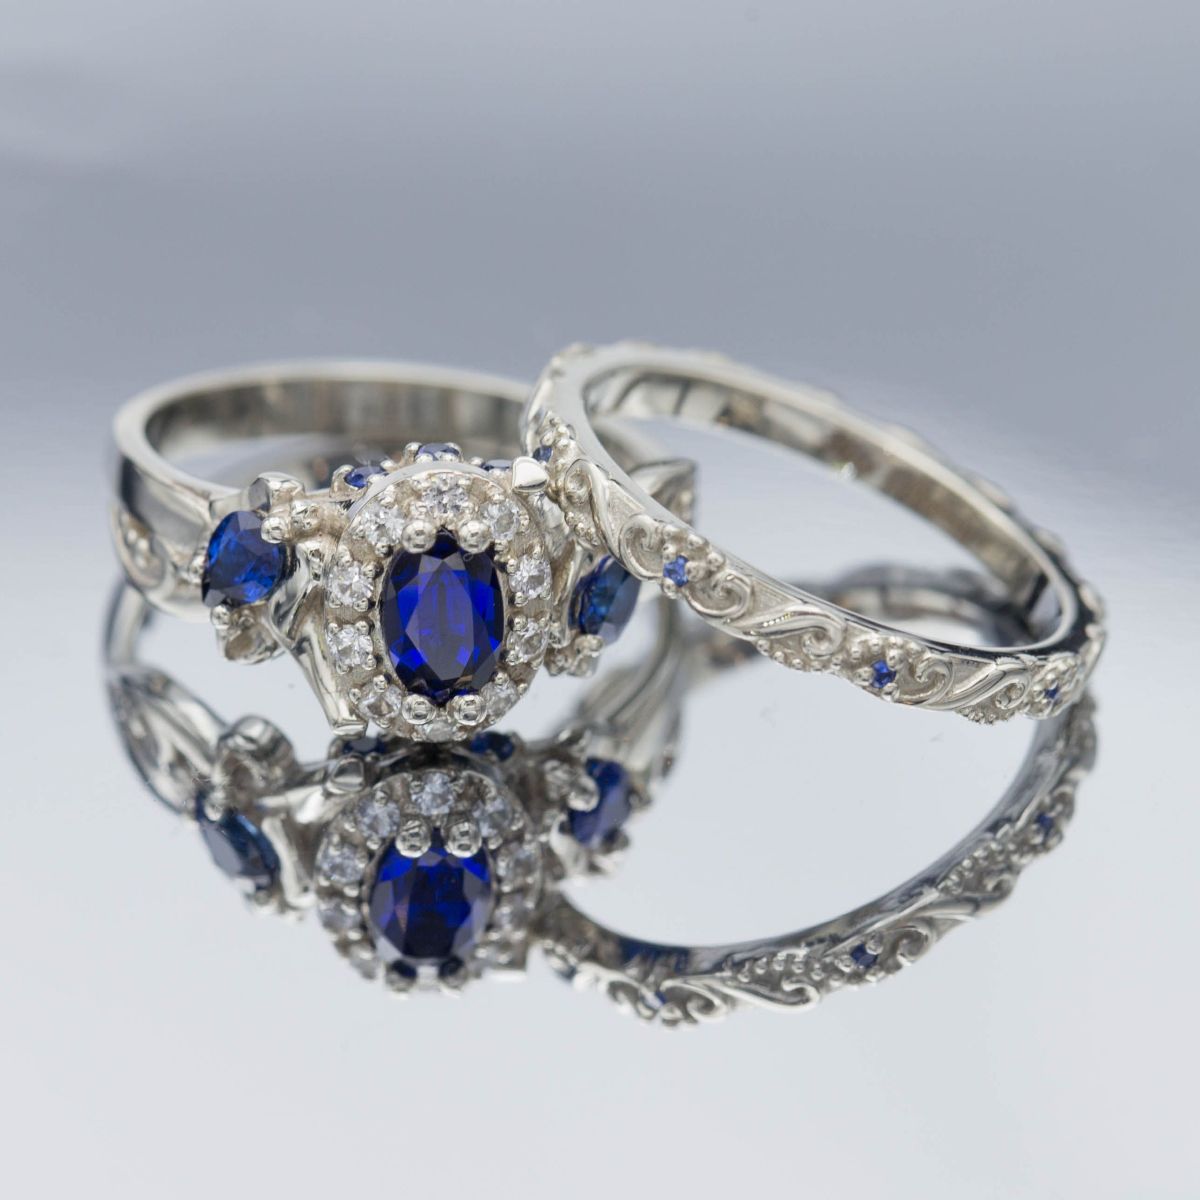  Sapphire  Engagement  Rings  CustomMade com